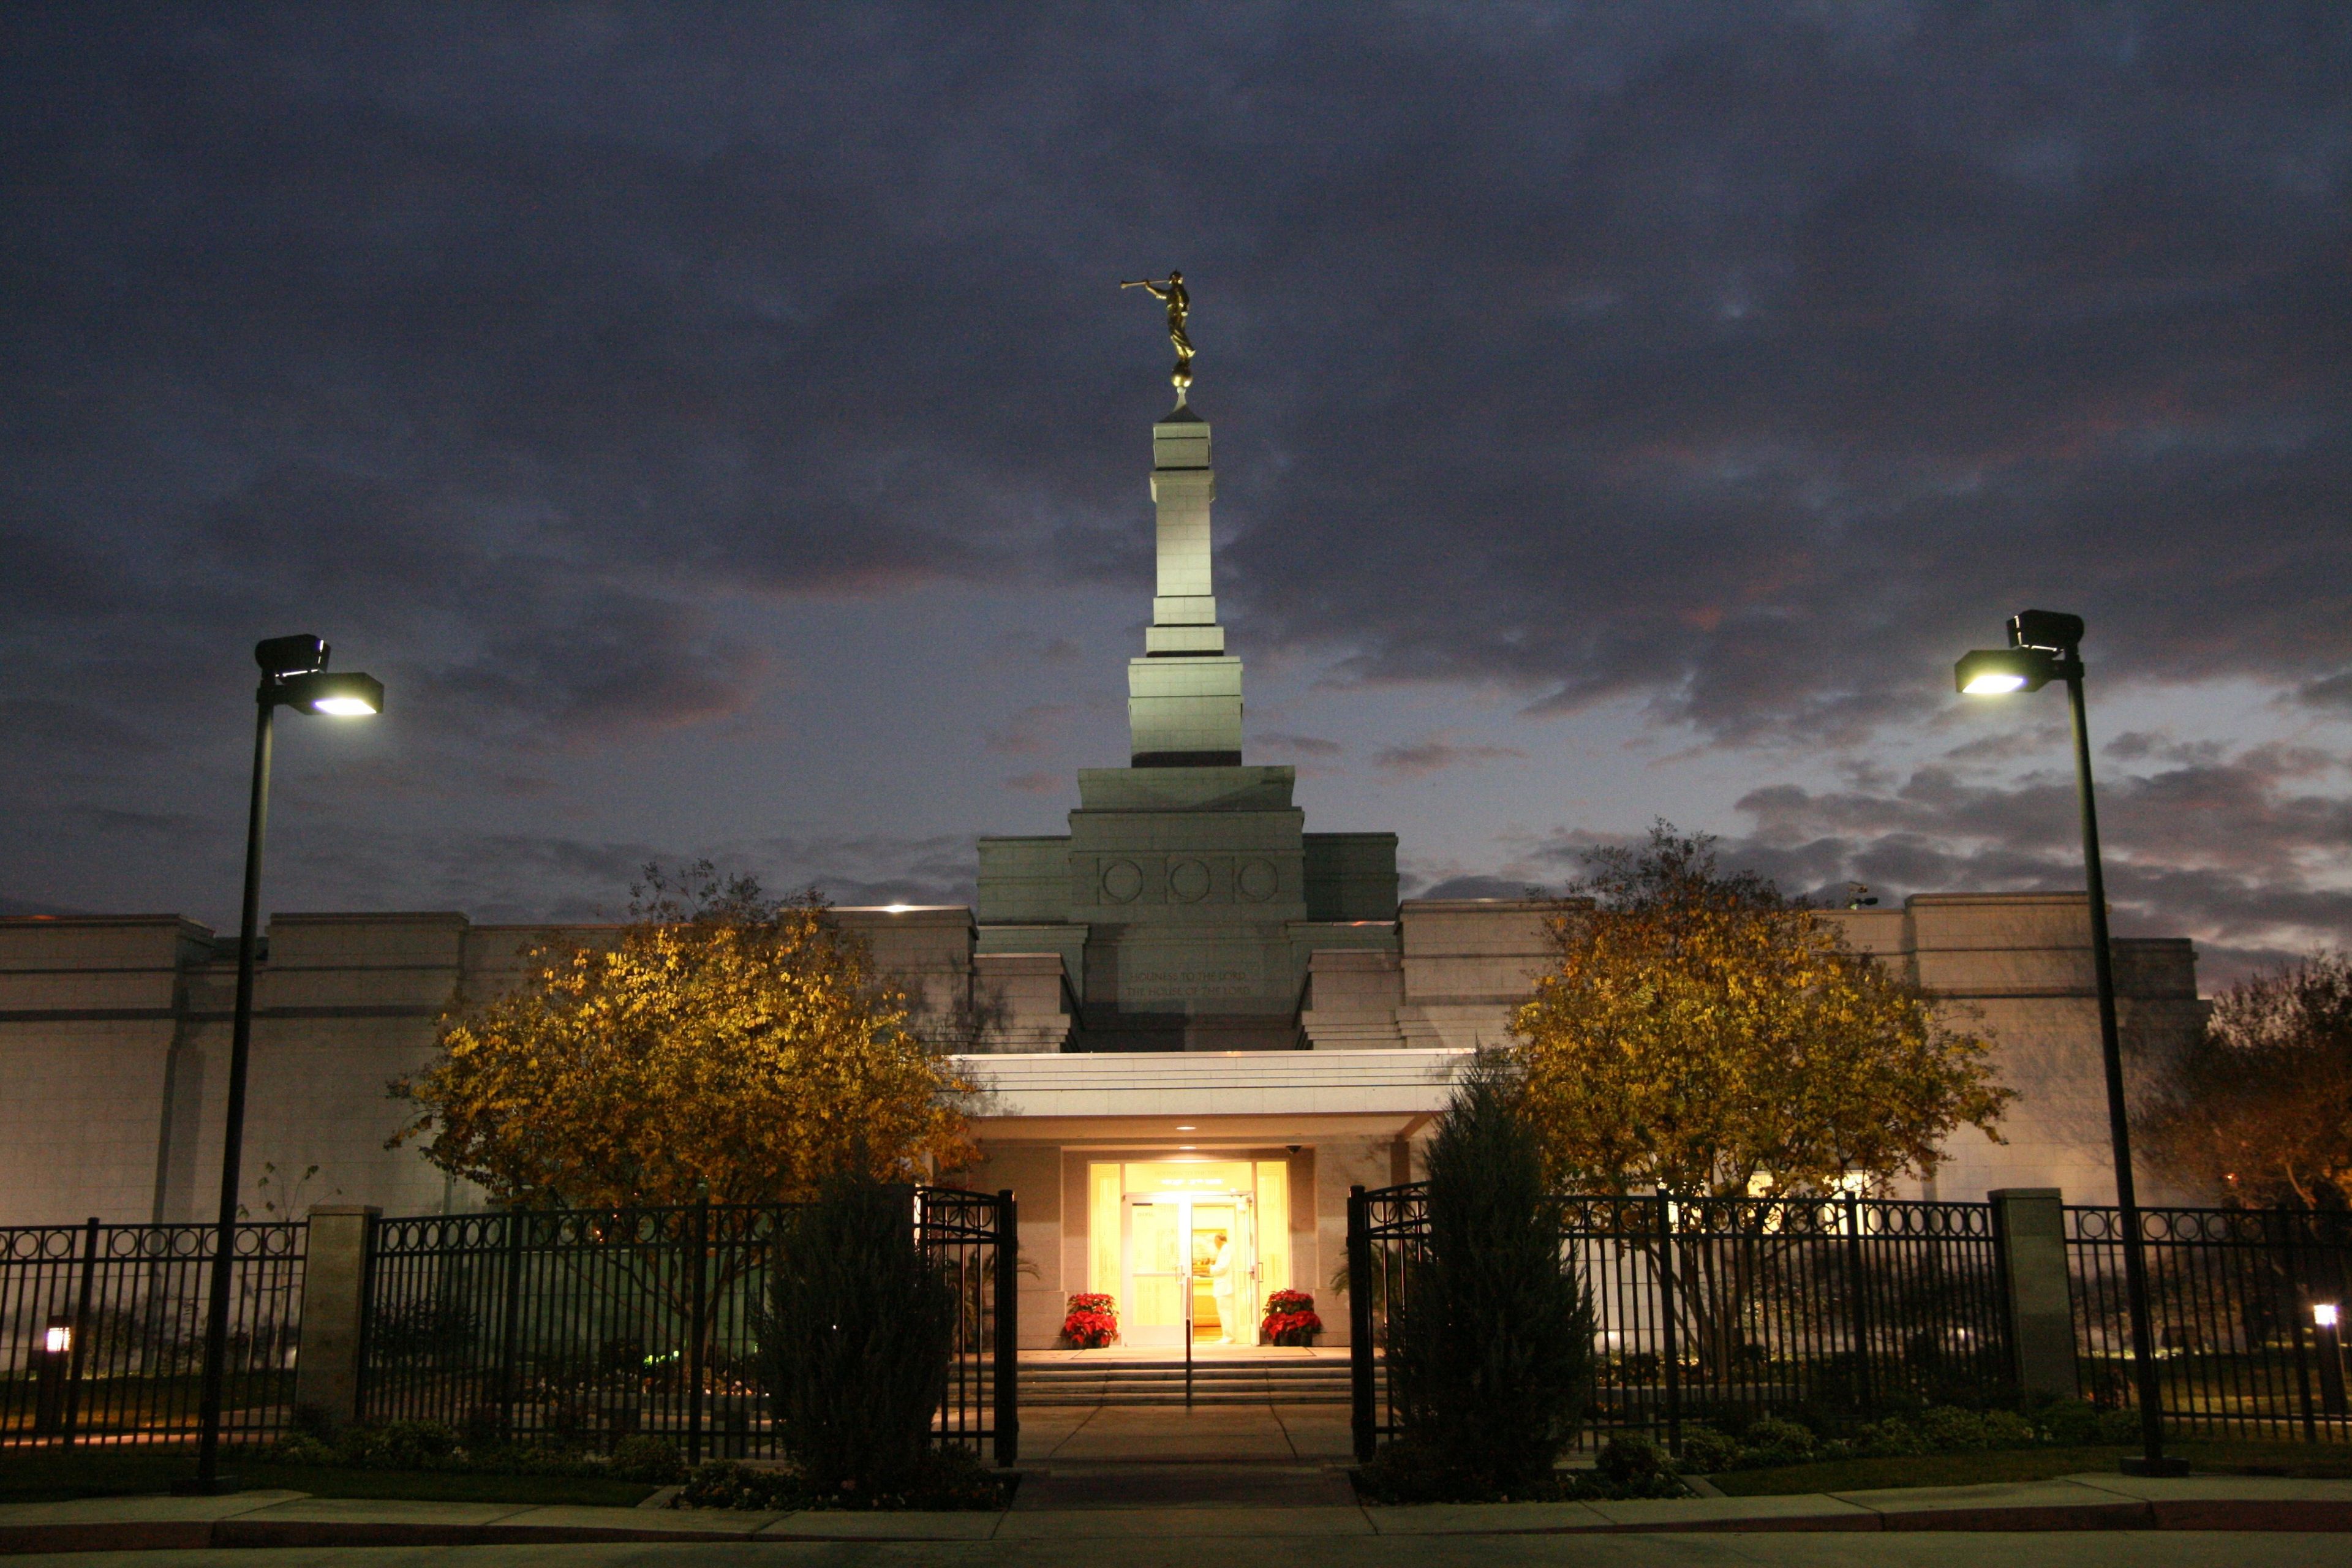 An exterior view of the Fresno California Temple at night.